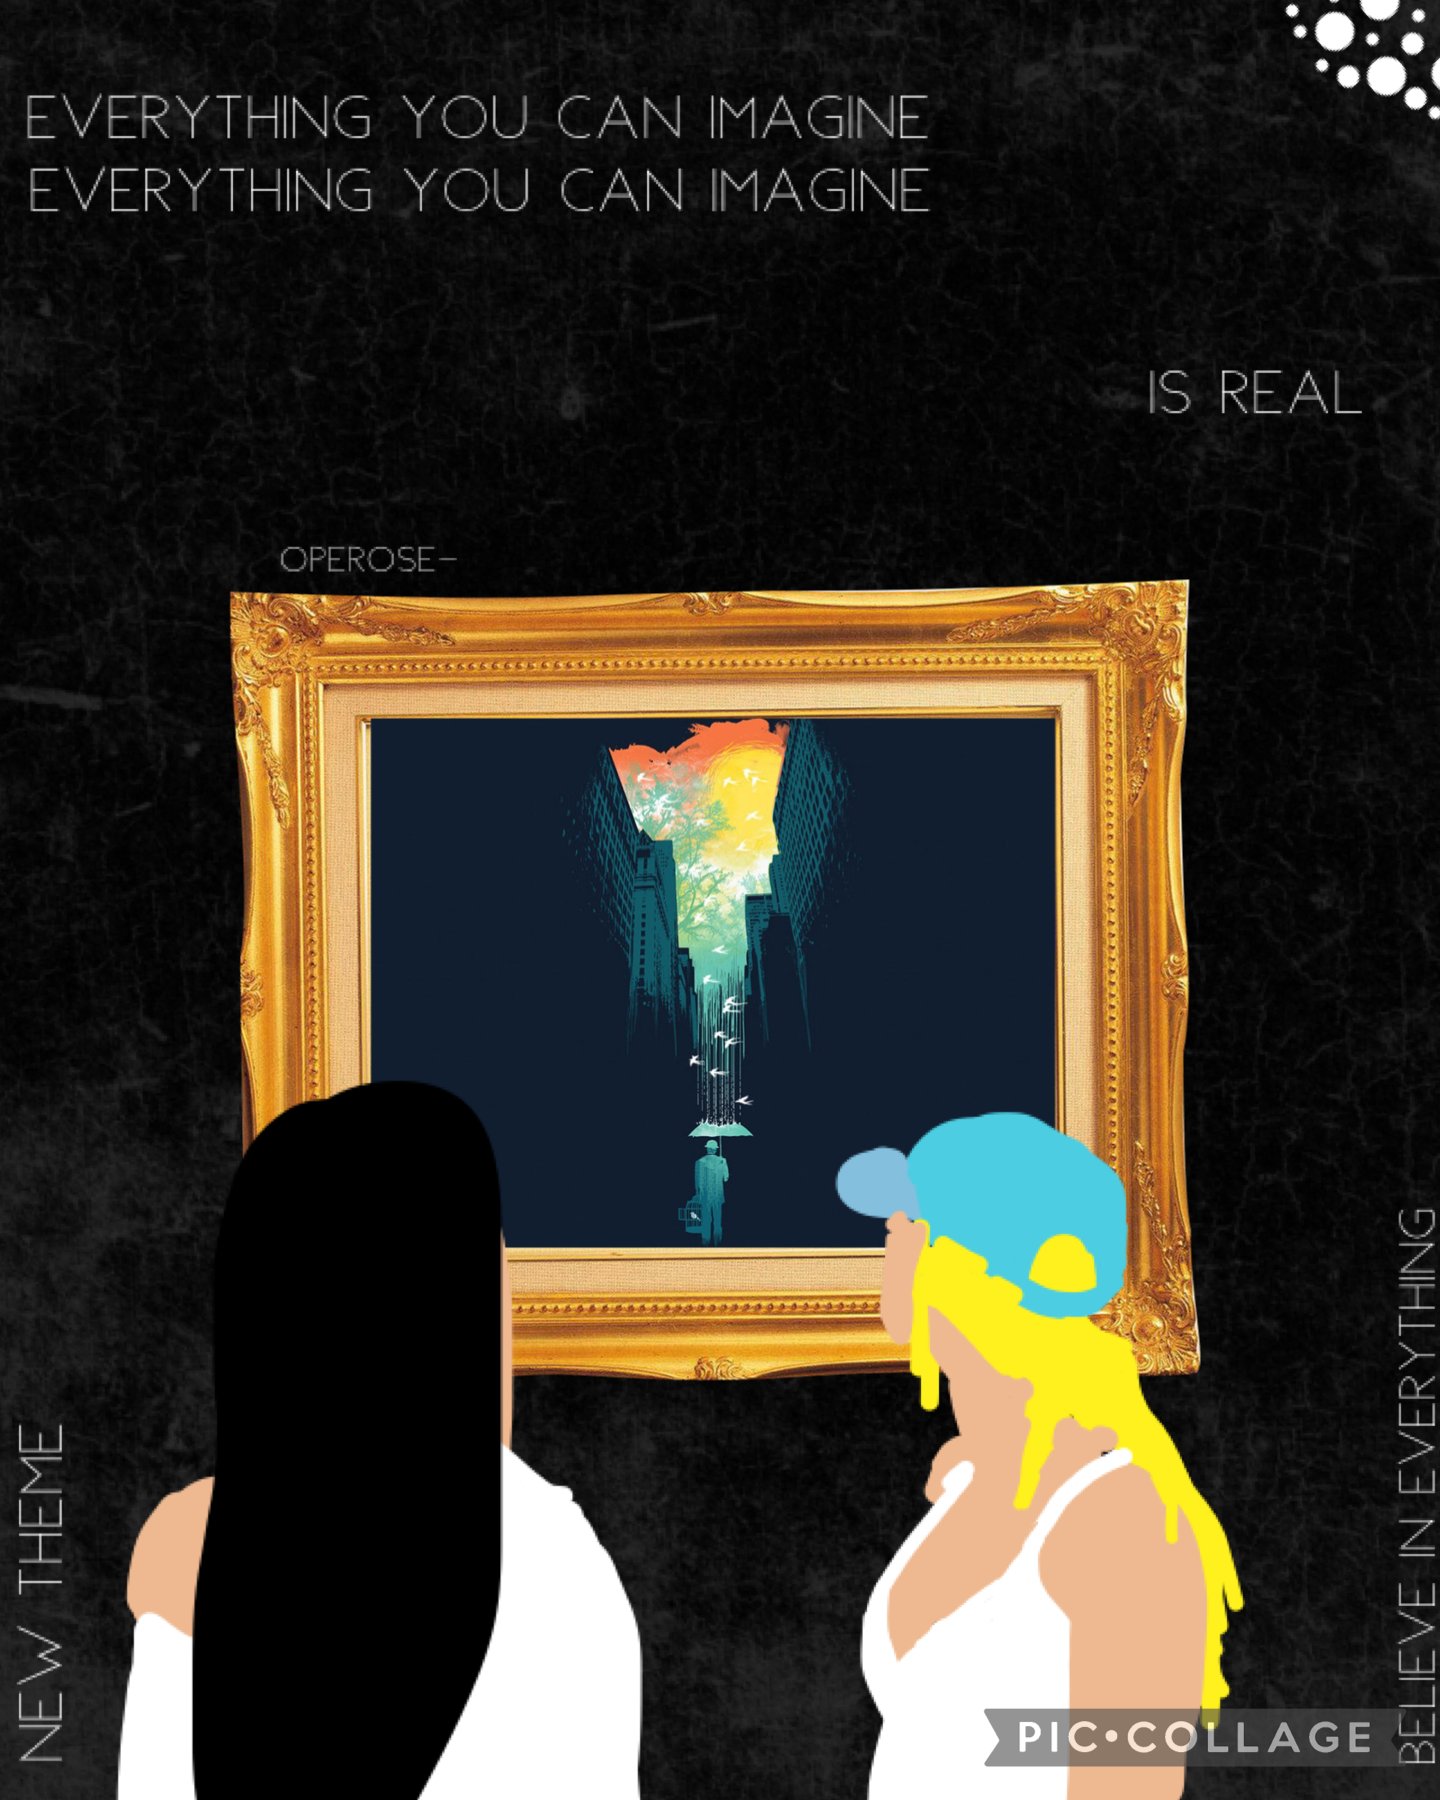 •tap•
8/9/21
This is the first collage of my new theme, Everything you can imagine is real. It’s very different from my normal style and covers deeper real problems! Hope you enjoy!
~Ava